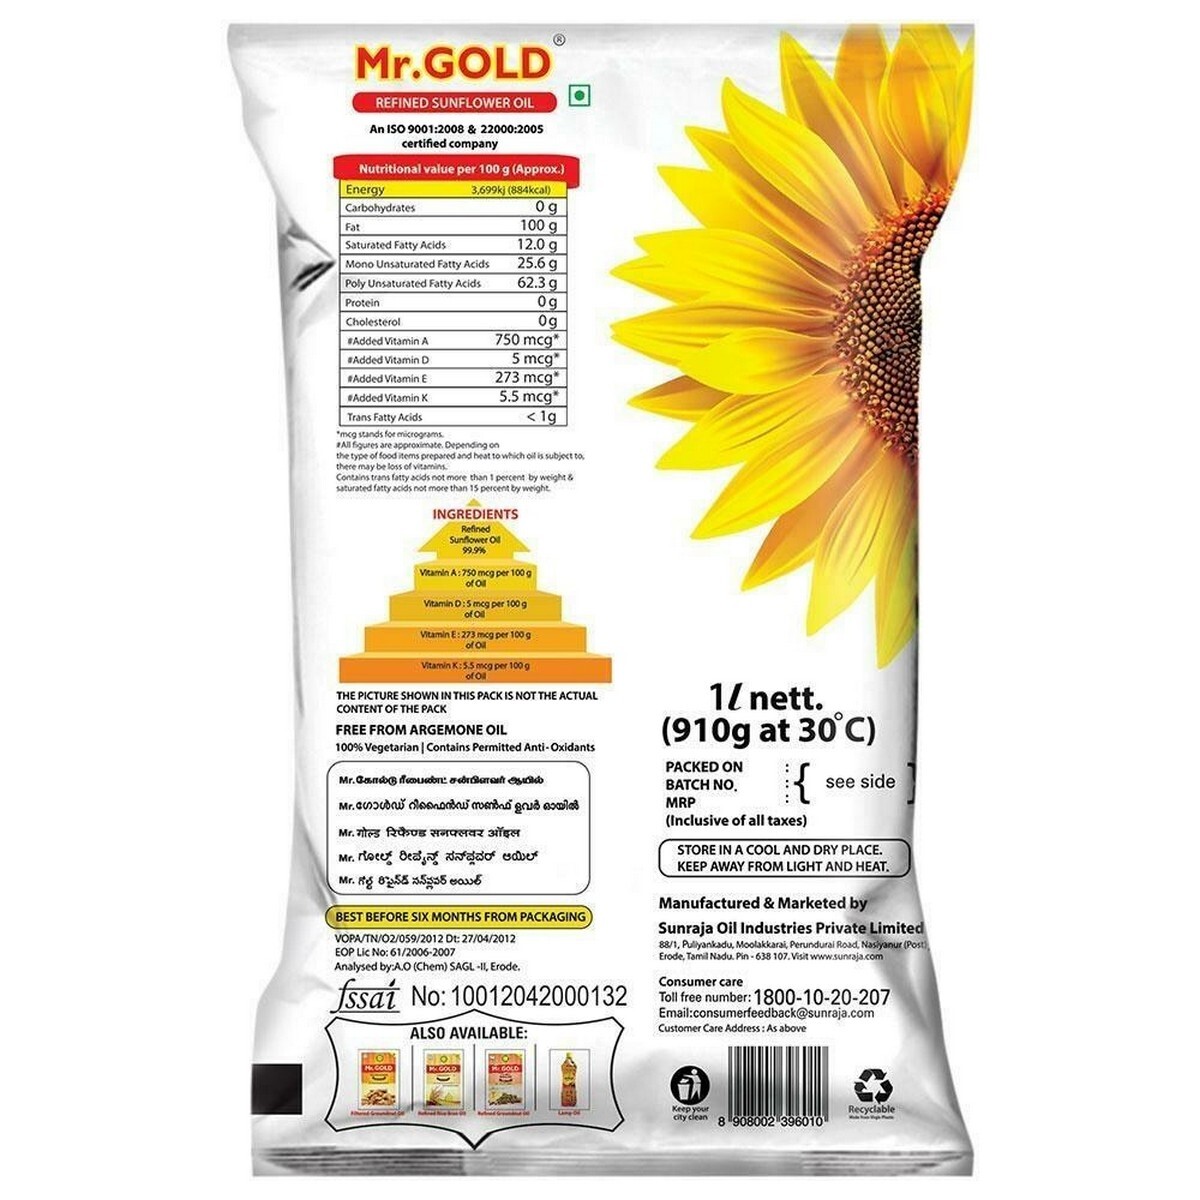 Mr.Gold Refined Sunflower Oil Pouch 1L